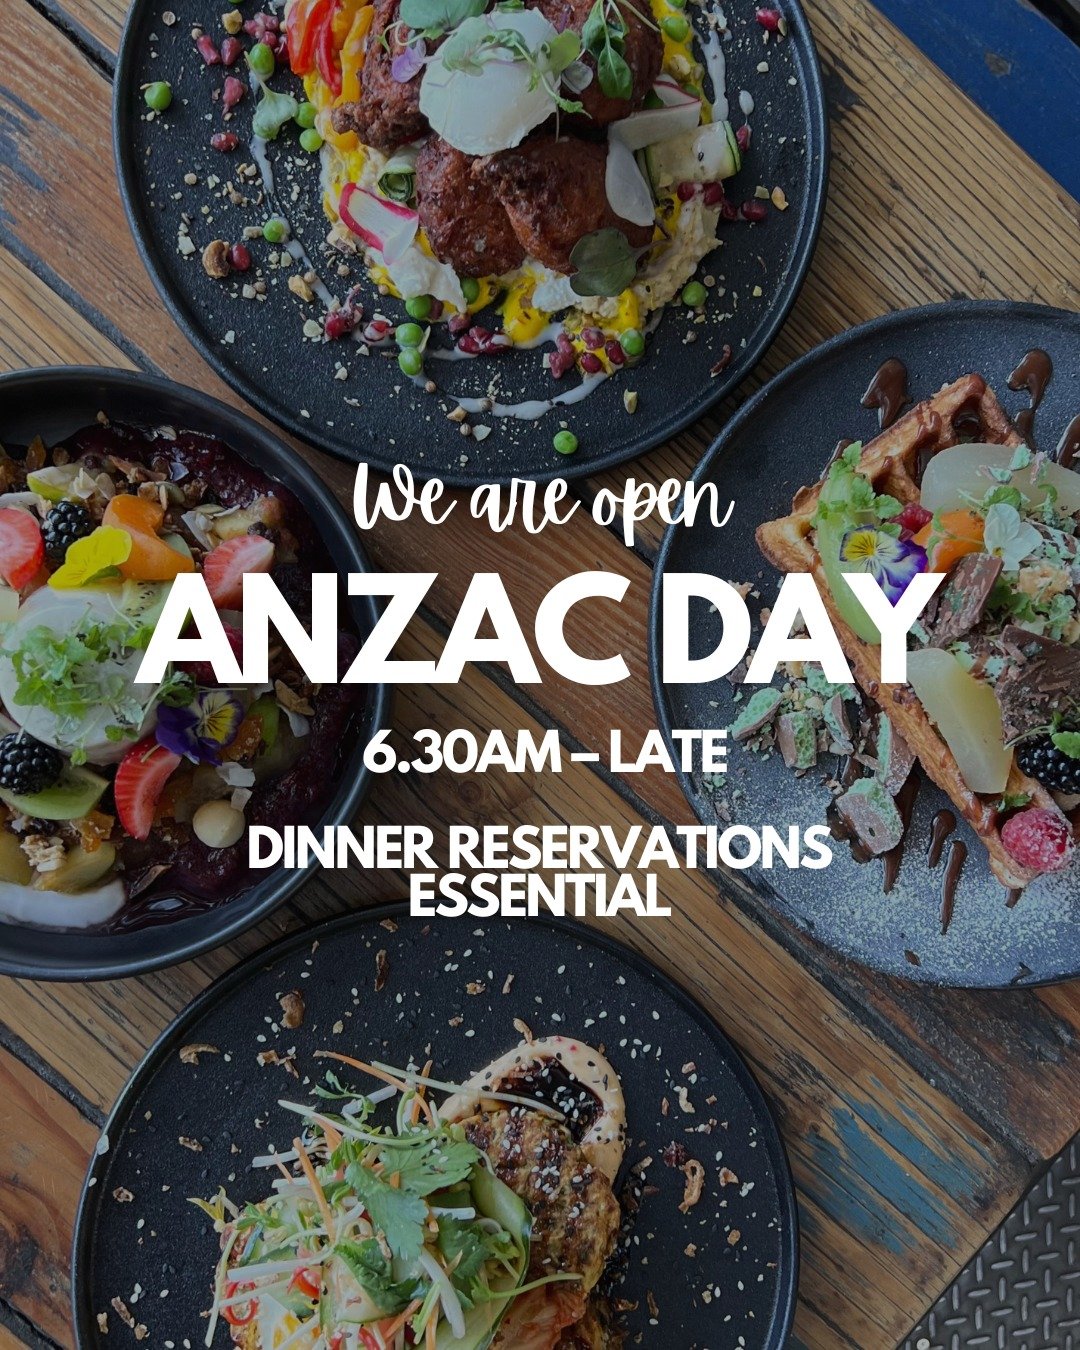 Anzac Day plans? Sorted! Here&rsquo;s your reminder that Boxy is open as normal from 6:30 AM until the going down of the sun. 

Whether you're fueling up after the dawn service or winding down with dinner, we've got you covered all day. 

Reservation